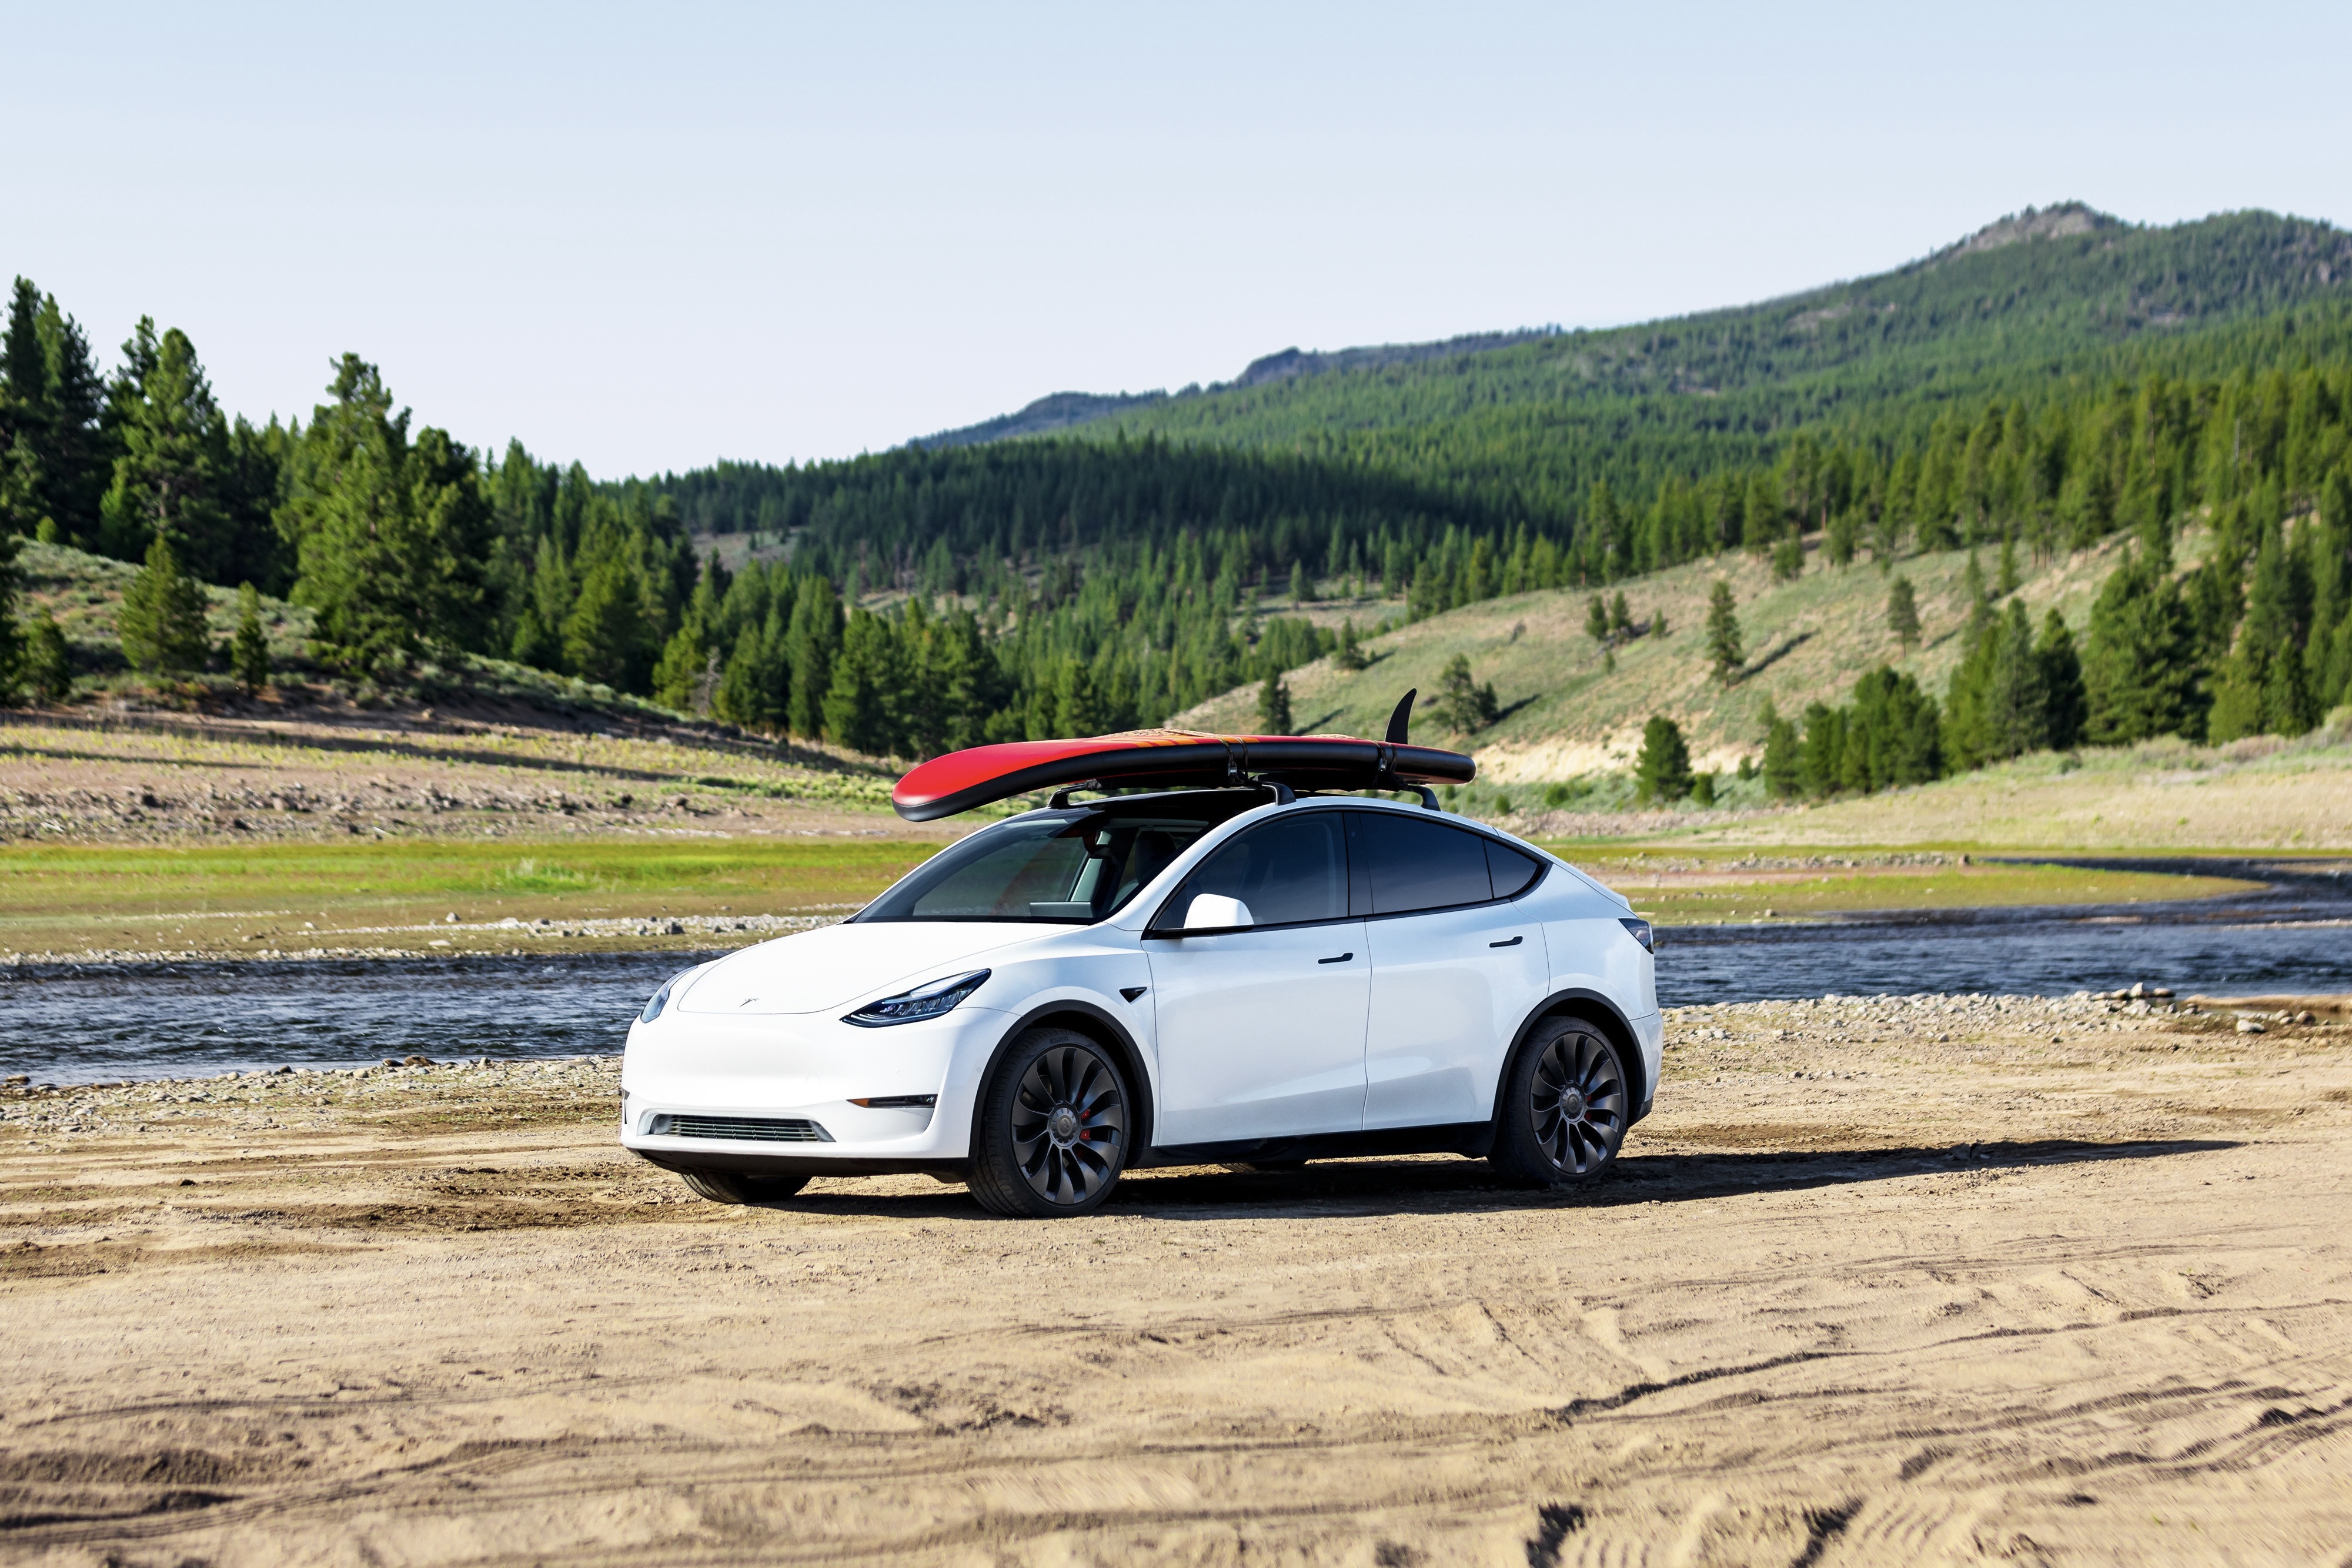 Front end angle of the Tesla Model Y parked in the woods with green hills in the back.